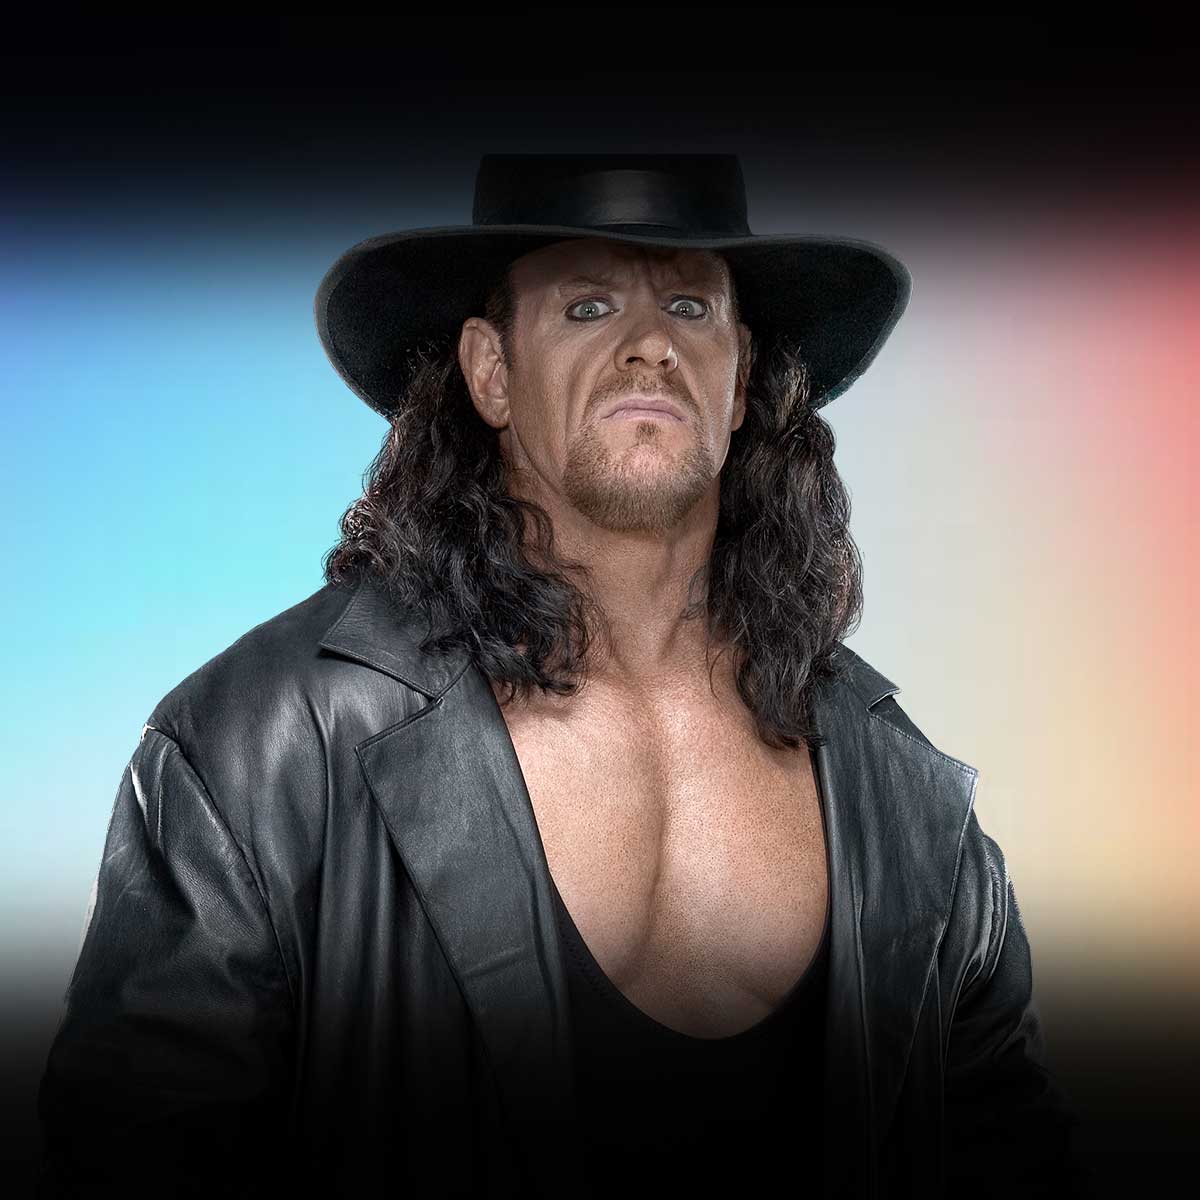 The Undertaker Biography: Movies, Age, Net Worth, Height, Parents, Wife, Children